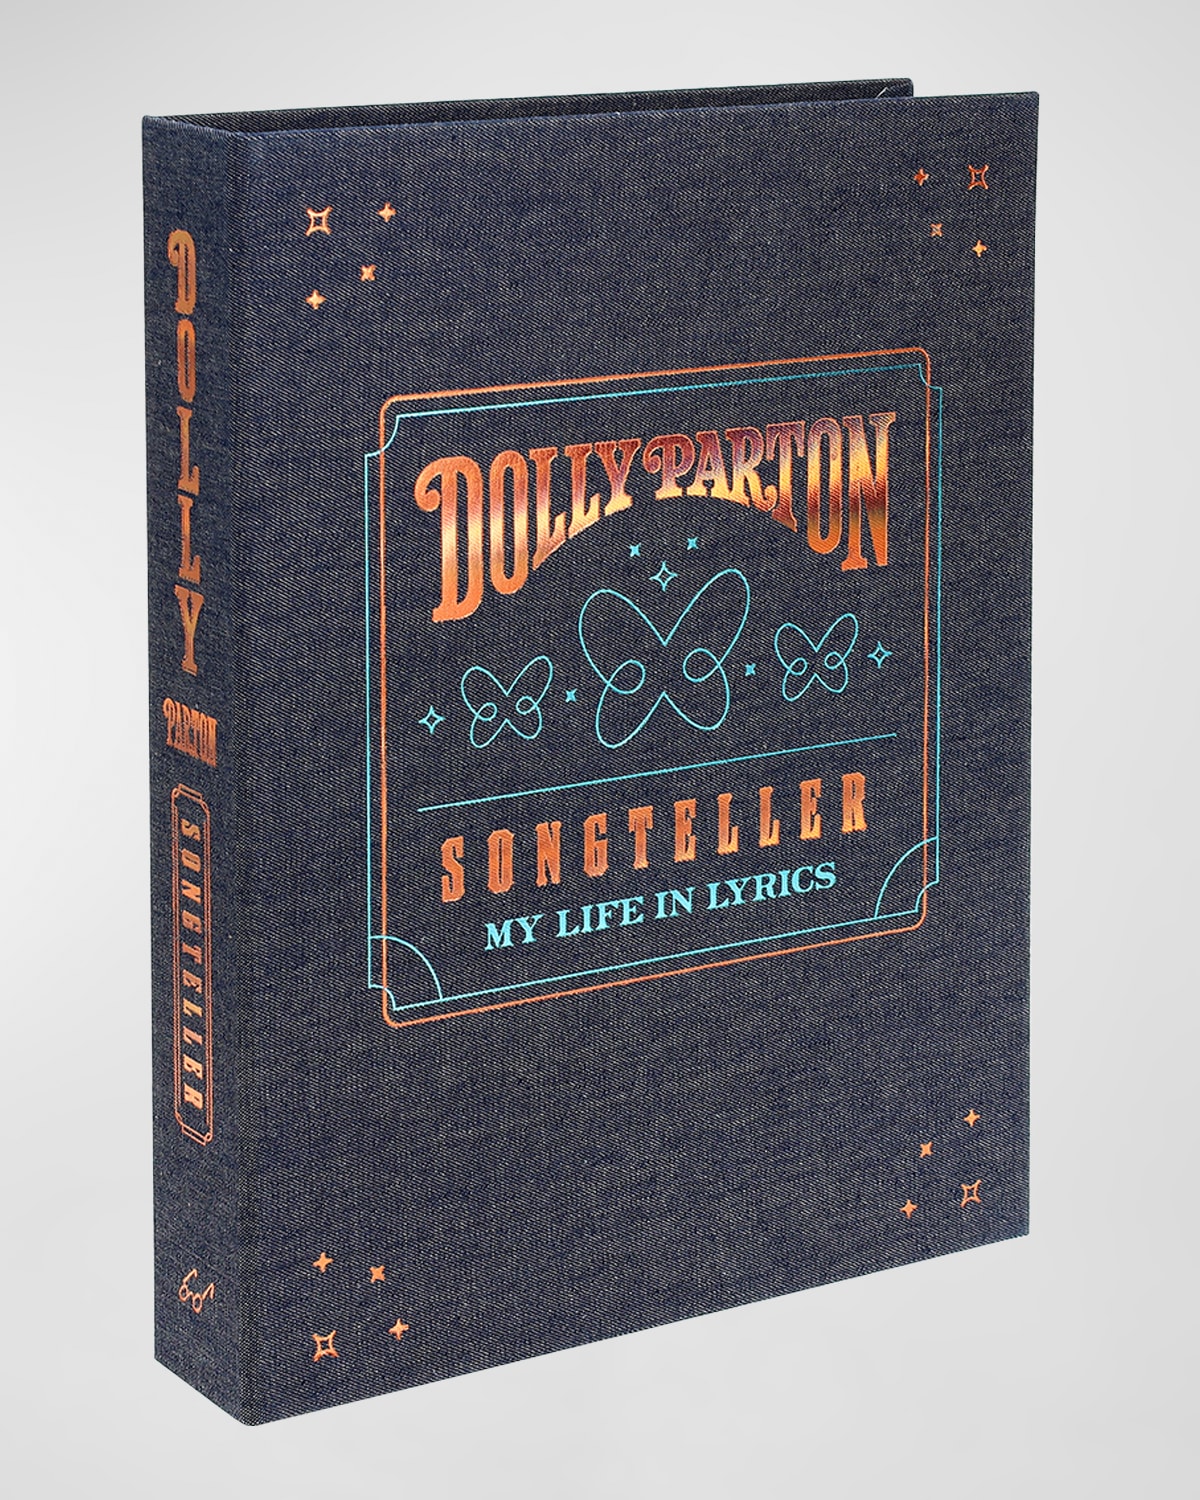 "Dolly Parton, Songteller: My Life in Lyrics" Limited Edition Book by Robert K. Oermann & Dolly Parton